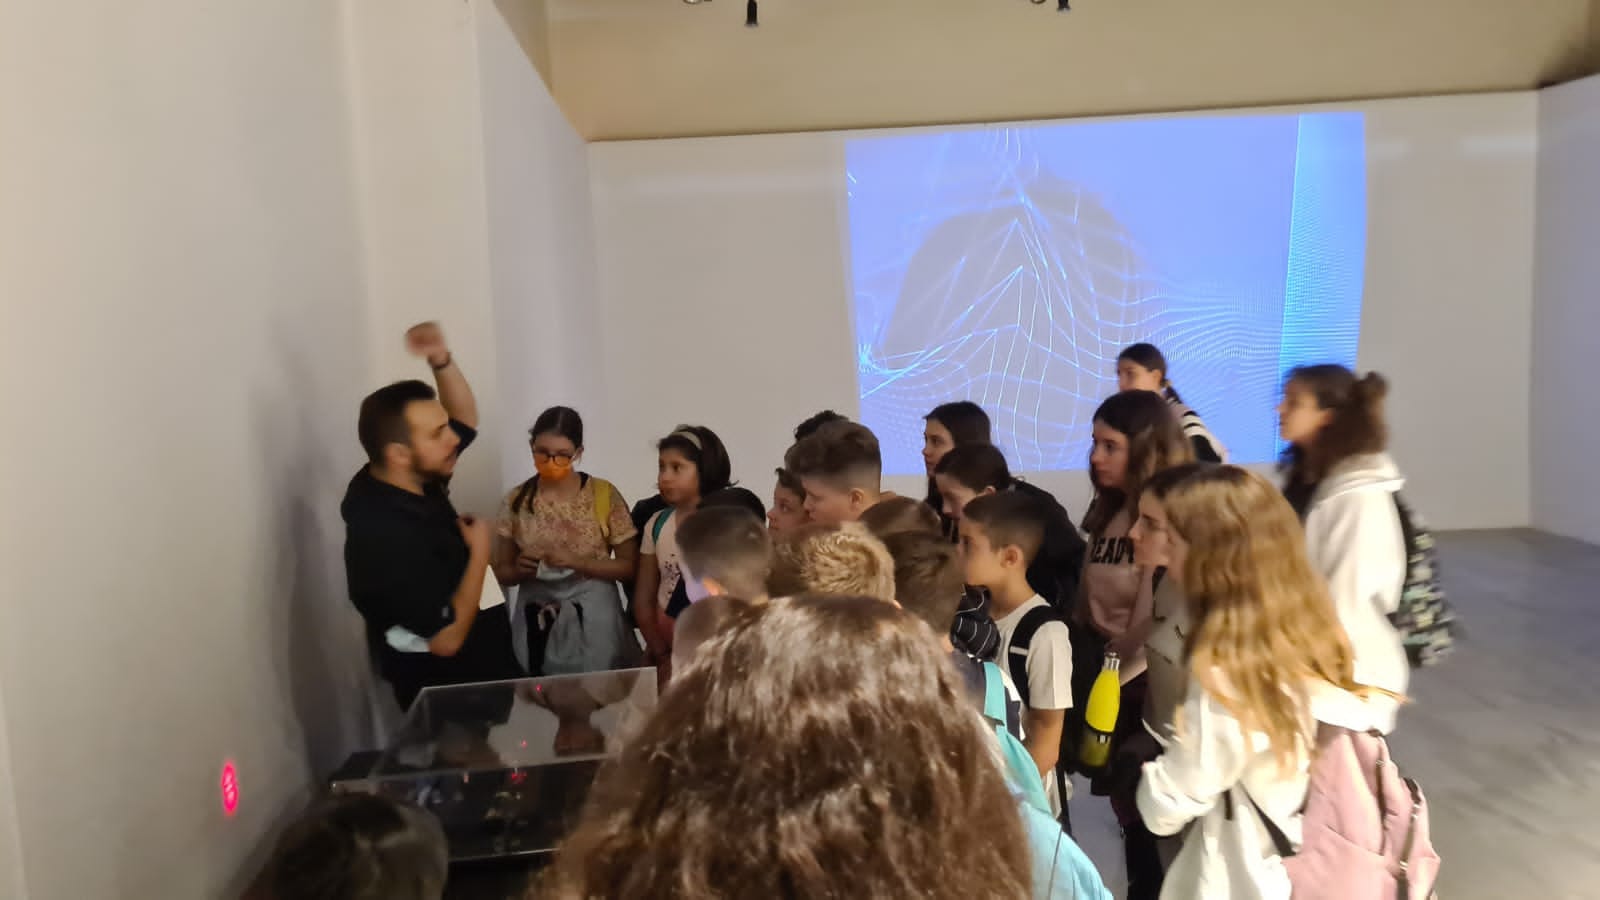 Introducing Gravitational Waves to students in Greece